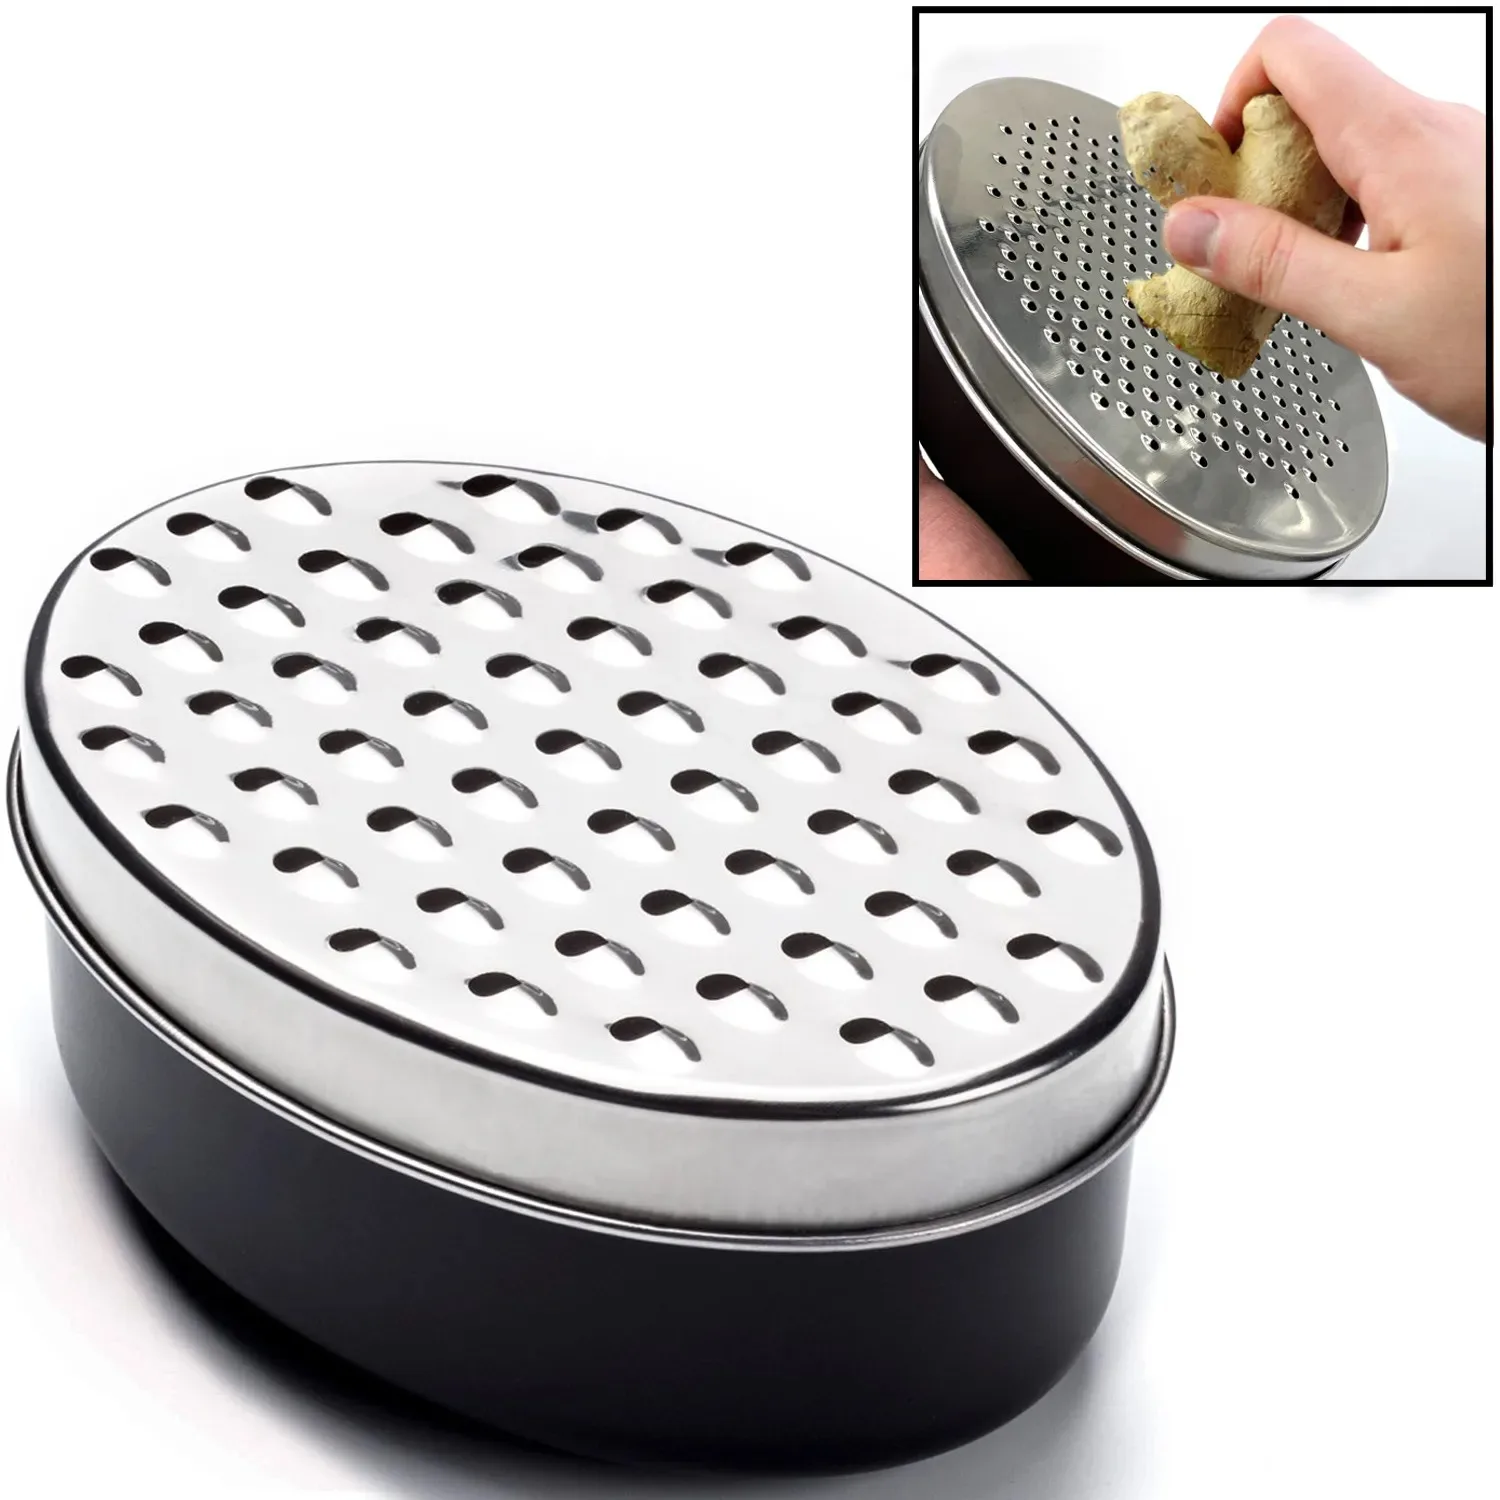 https://ae01.alicdn.com/kf/S58507ff01edc4762a721f8e6fecc5b7c5/Cheese-Grater-Citrus-Lemon-Zester-with-Food-Storage-Container-Lid-Perfect-For-Hard-Parmesan-Or-Soft.jpg